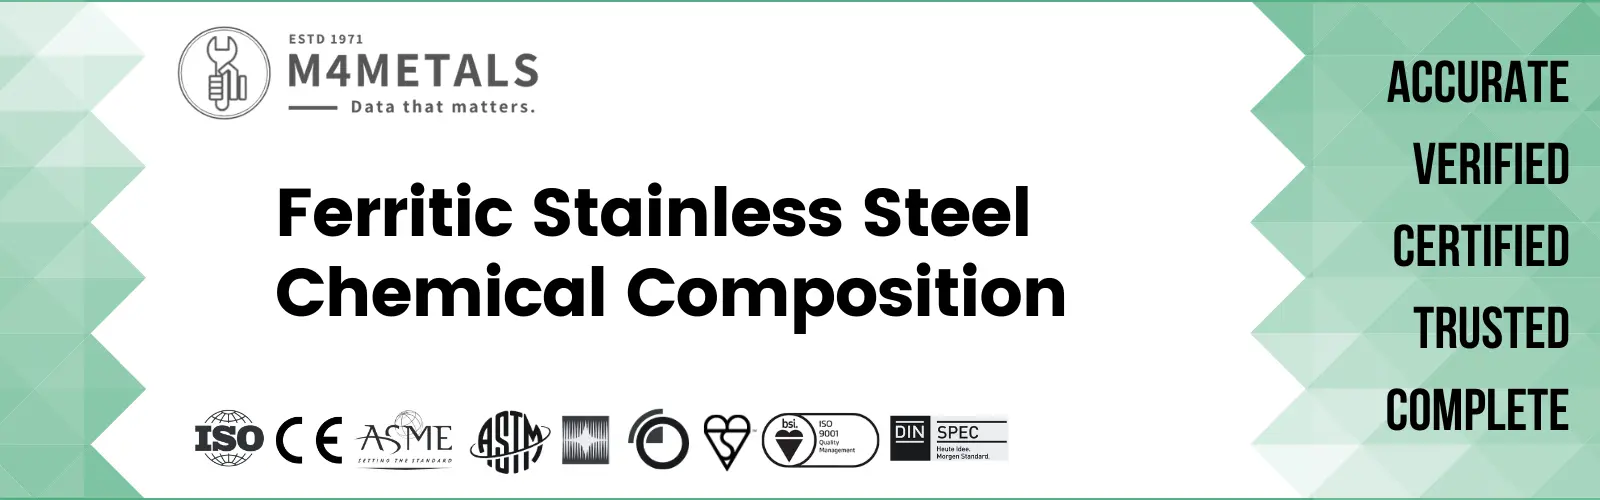 Ferritic Stainless Steel Chemical Composition